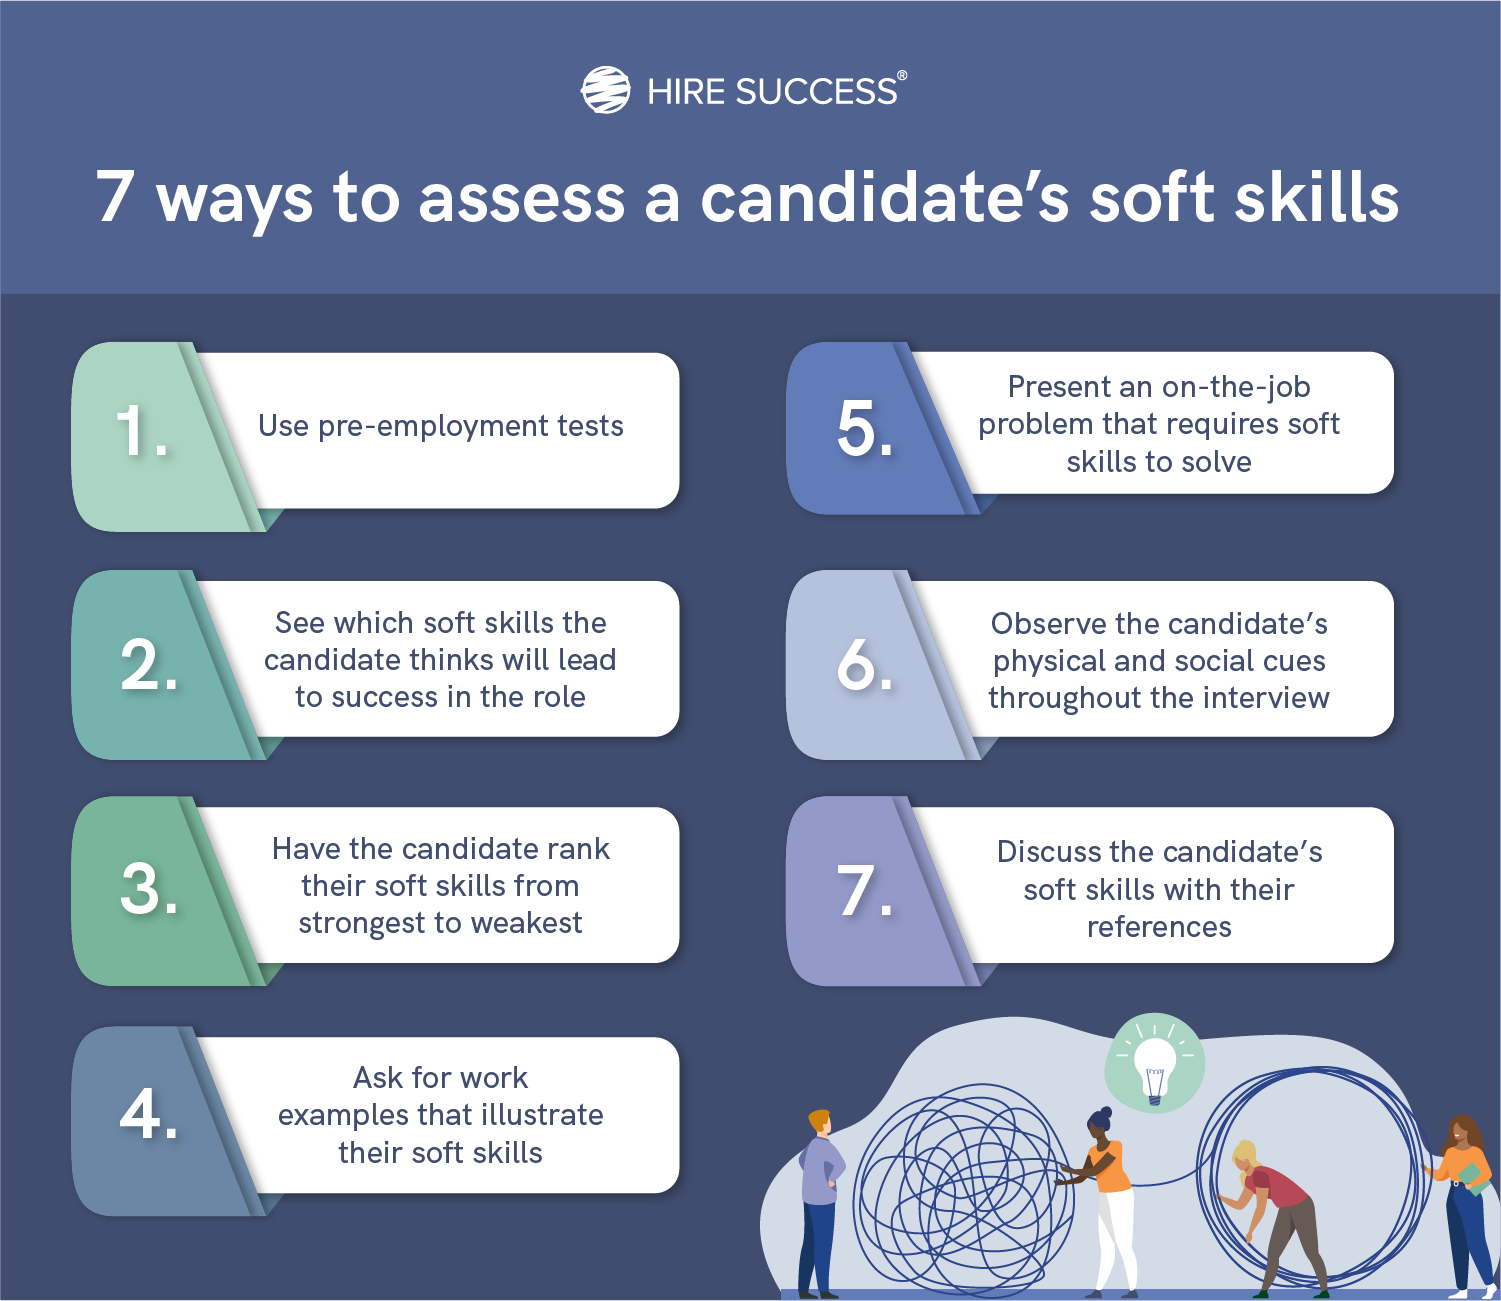 7 ways to assess a candidate’s soft skills